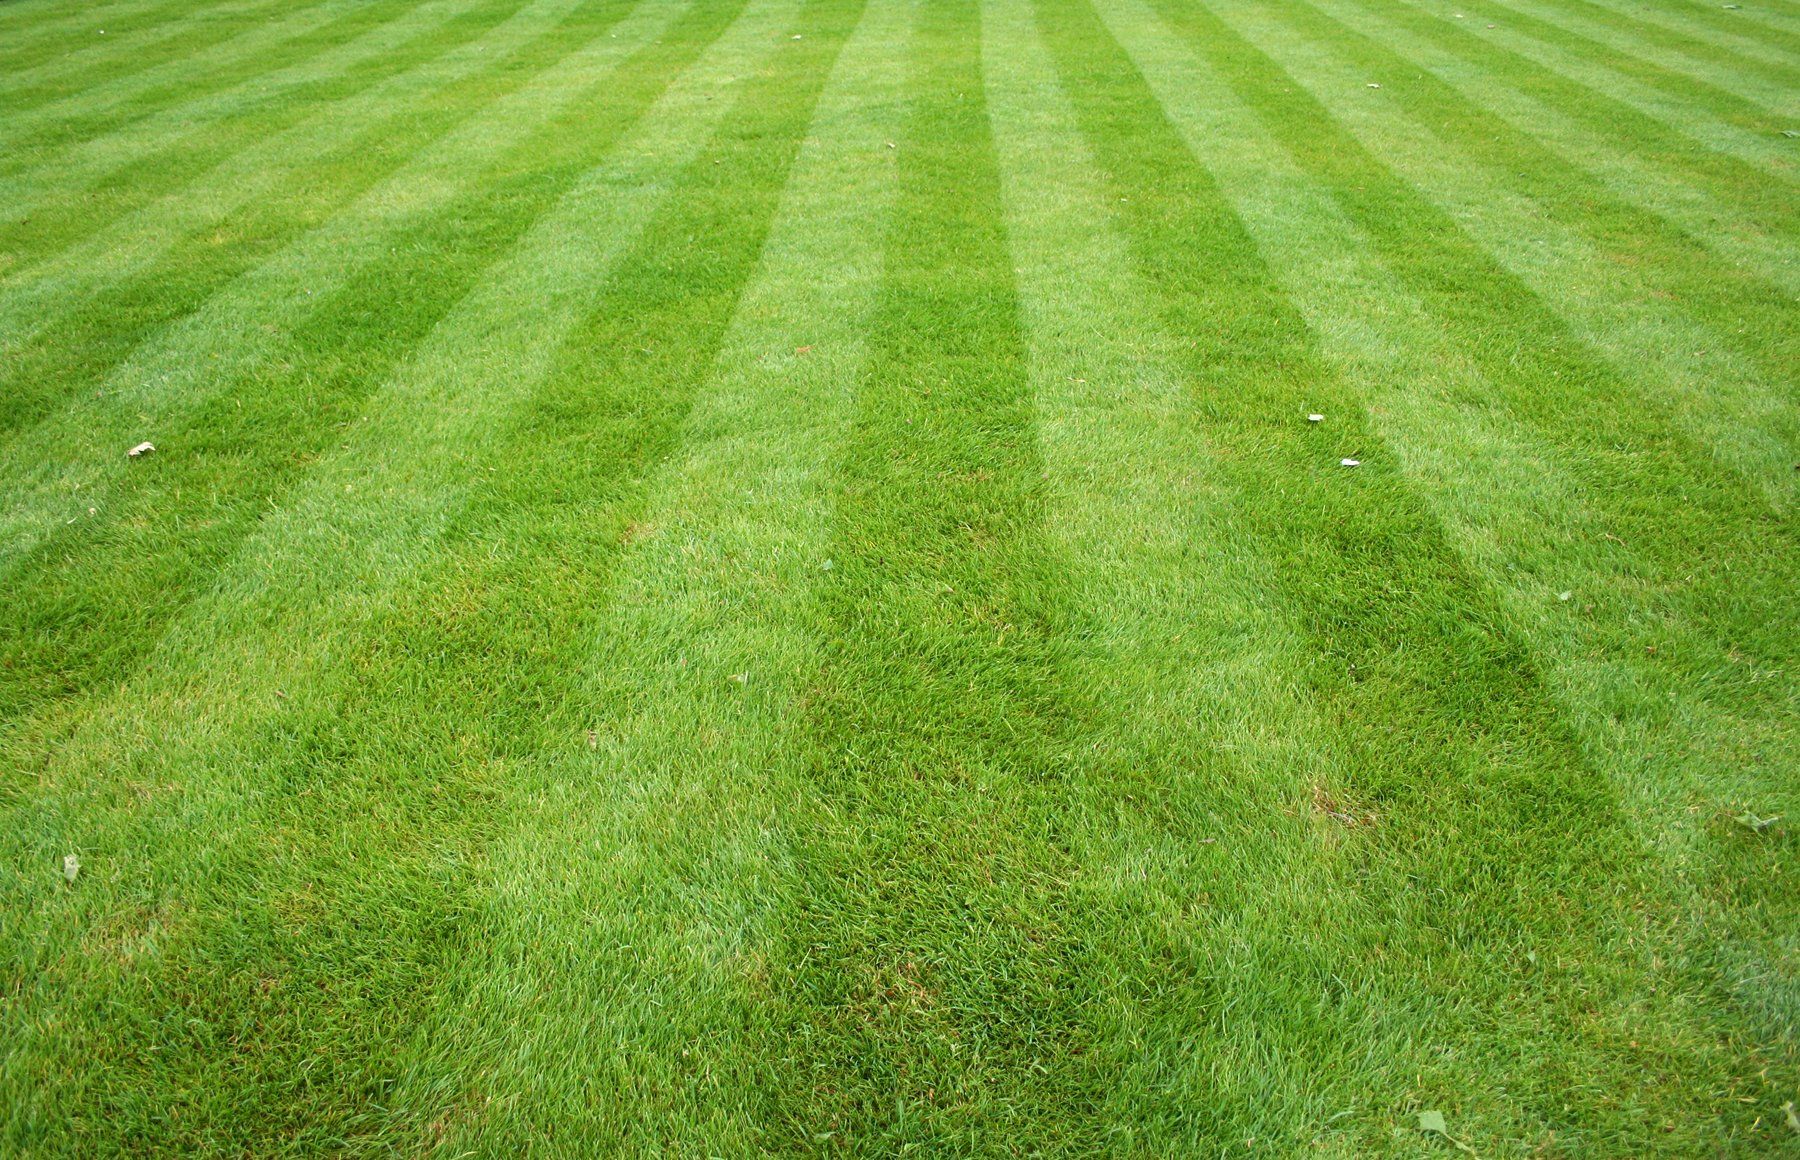 a close up of a lush green lawn with striped grass .